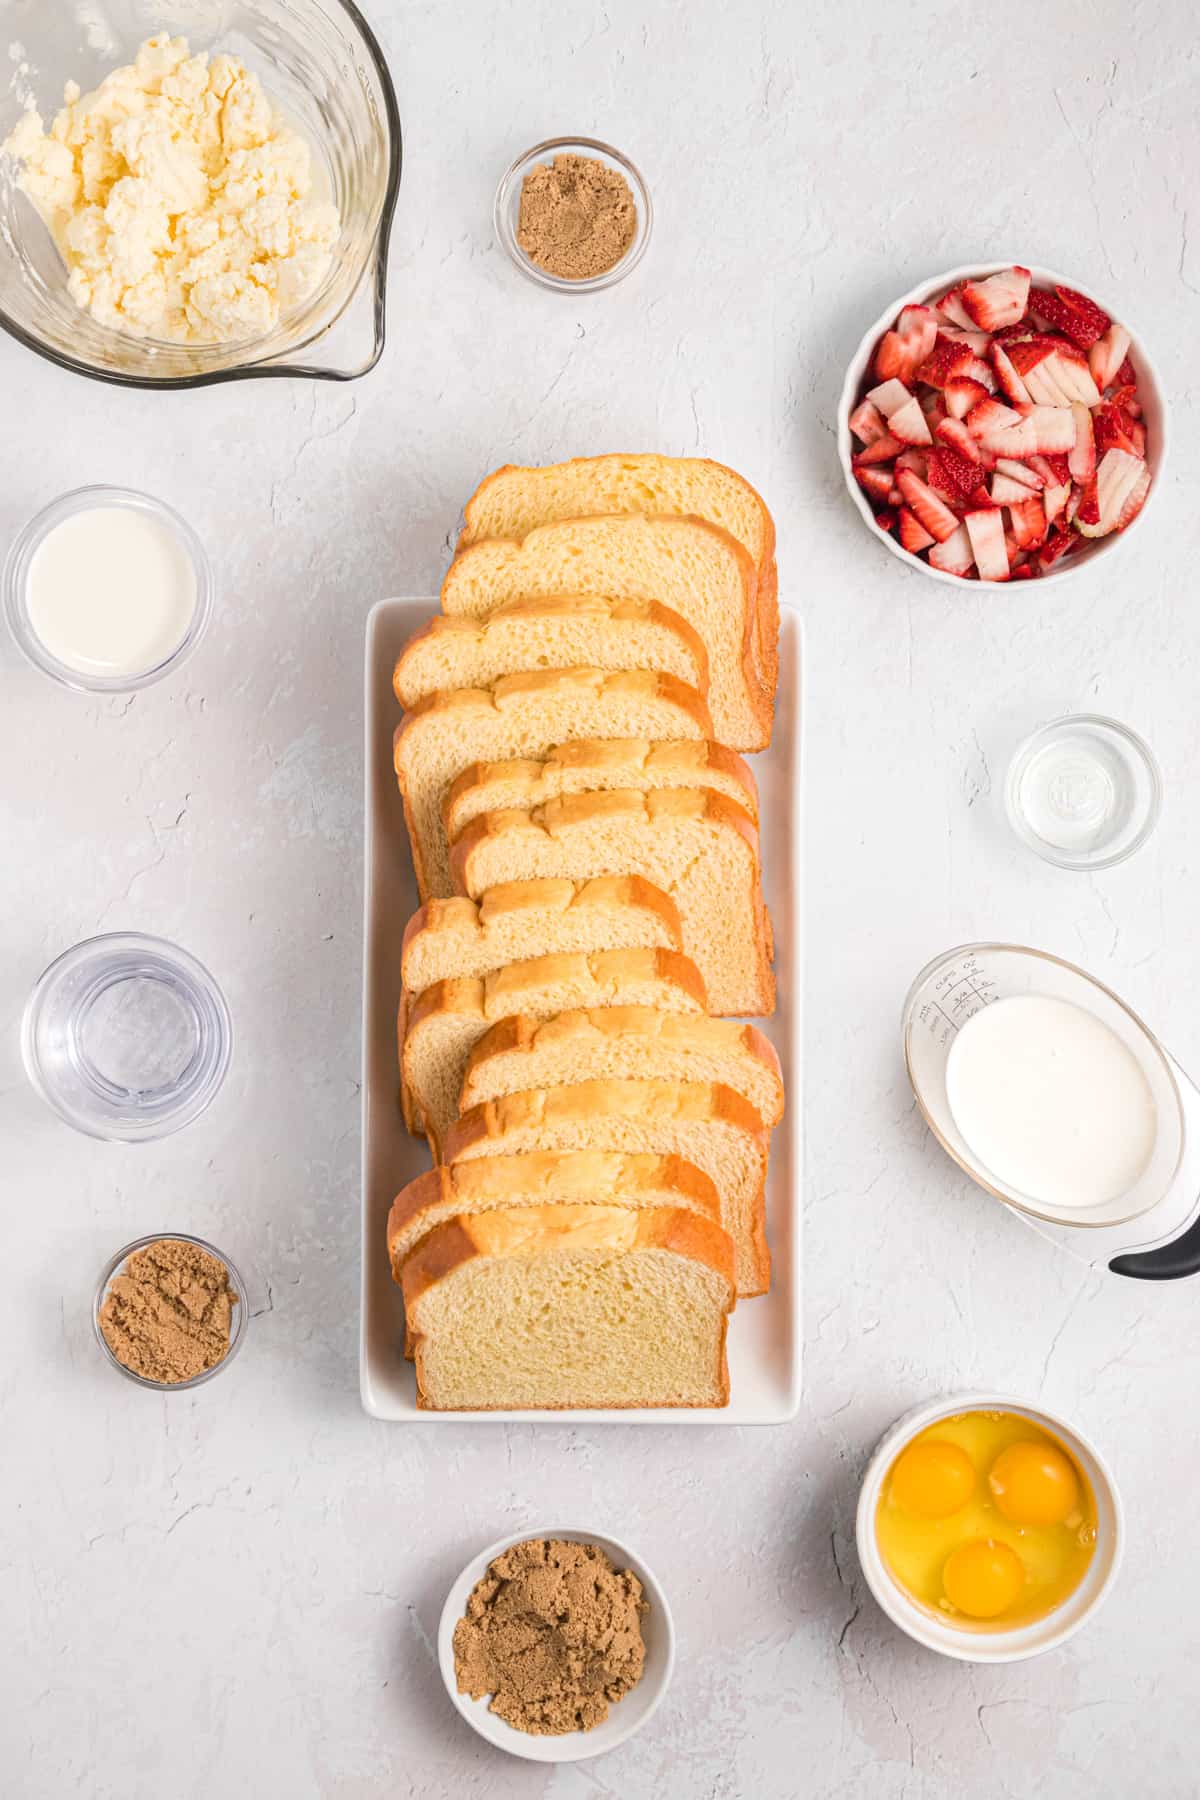 Sliced bread sits in the middle of a countertop and is surrounded by several different ingredients.